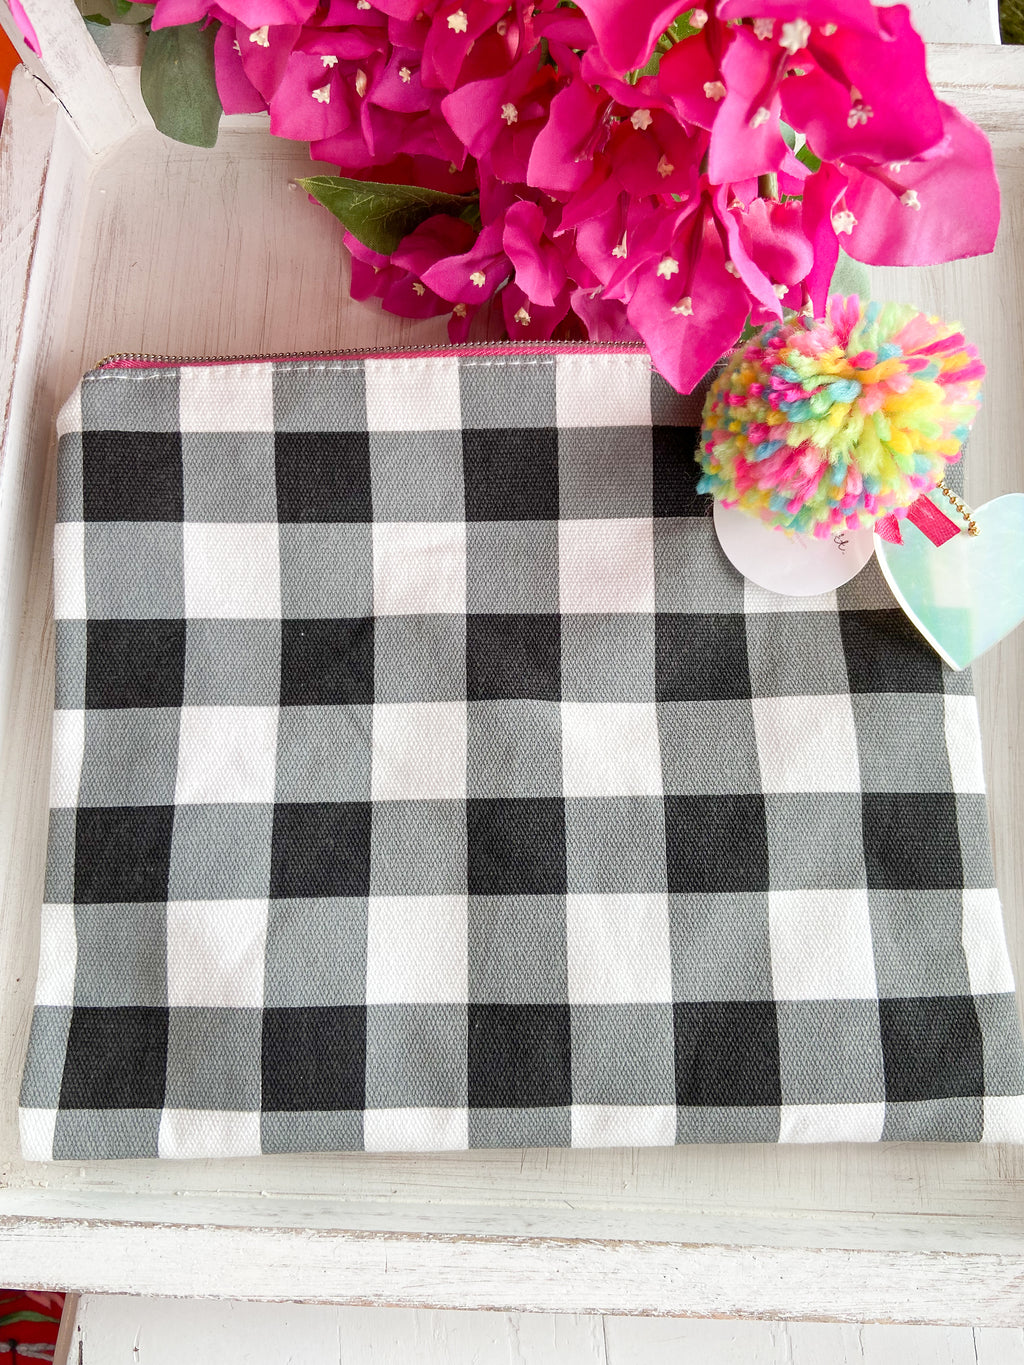 Black Gingham Pouch